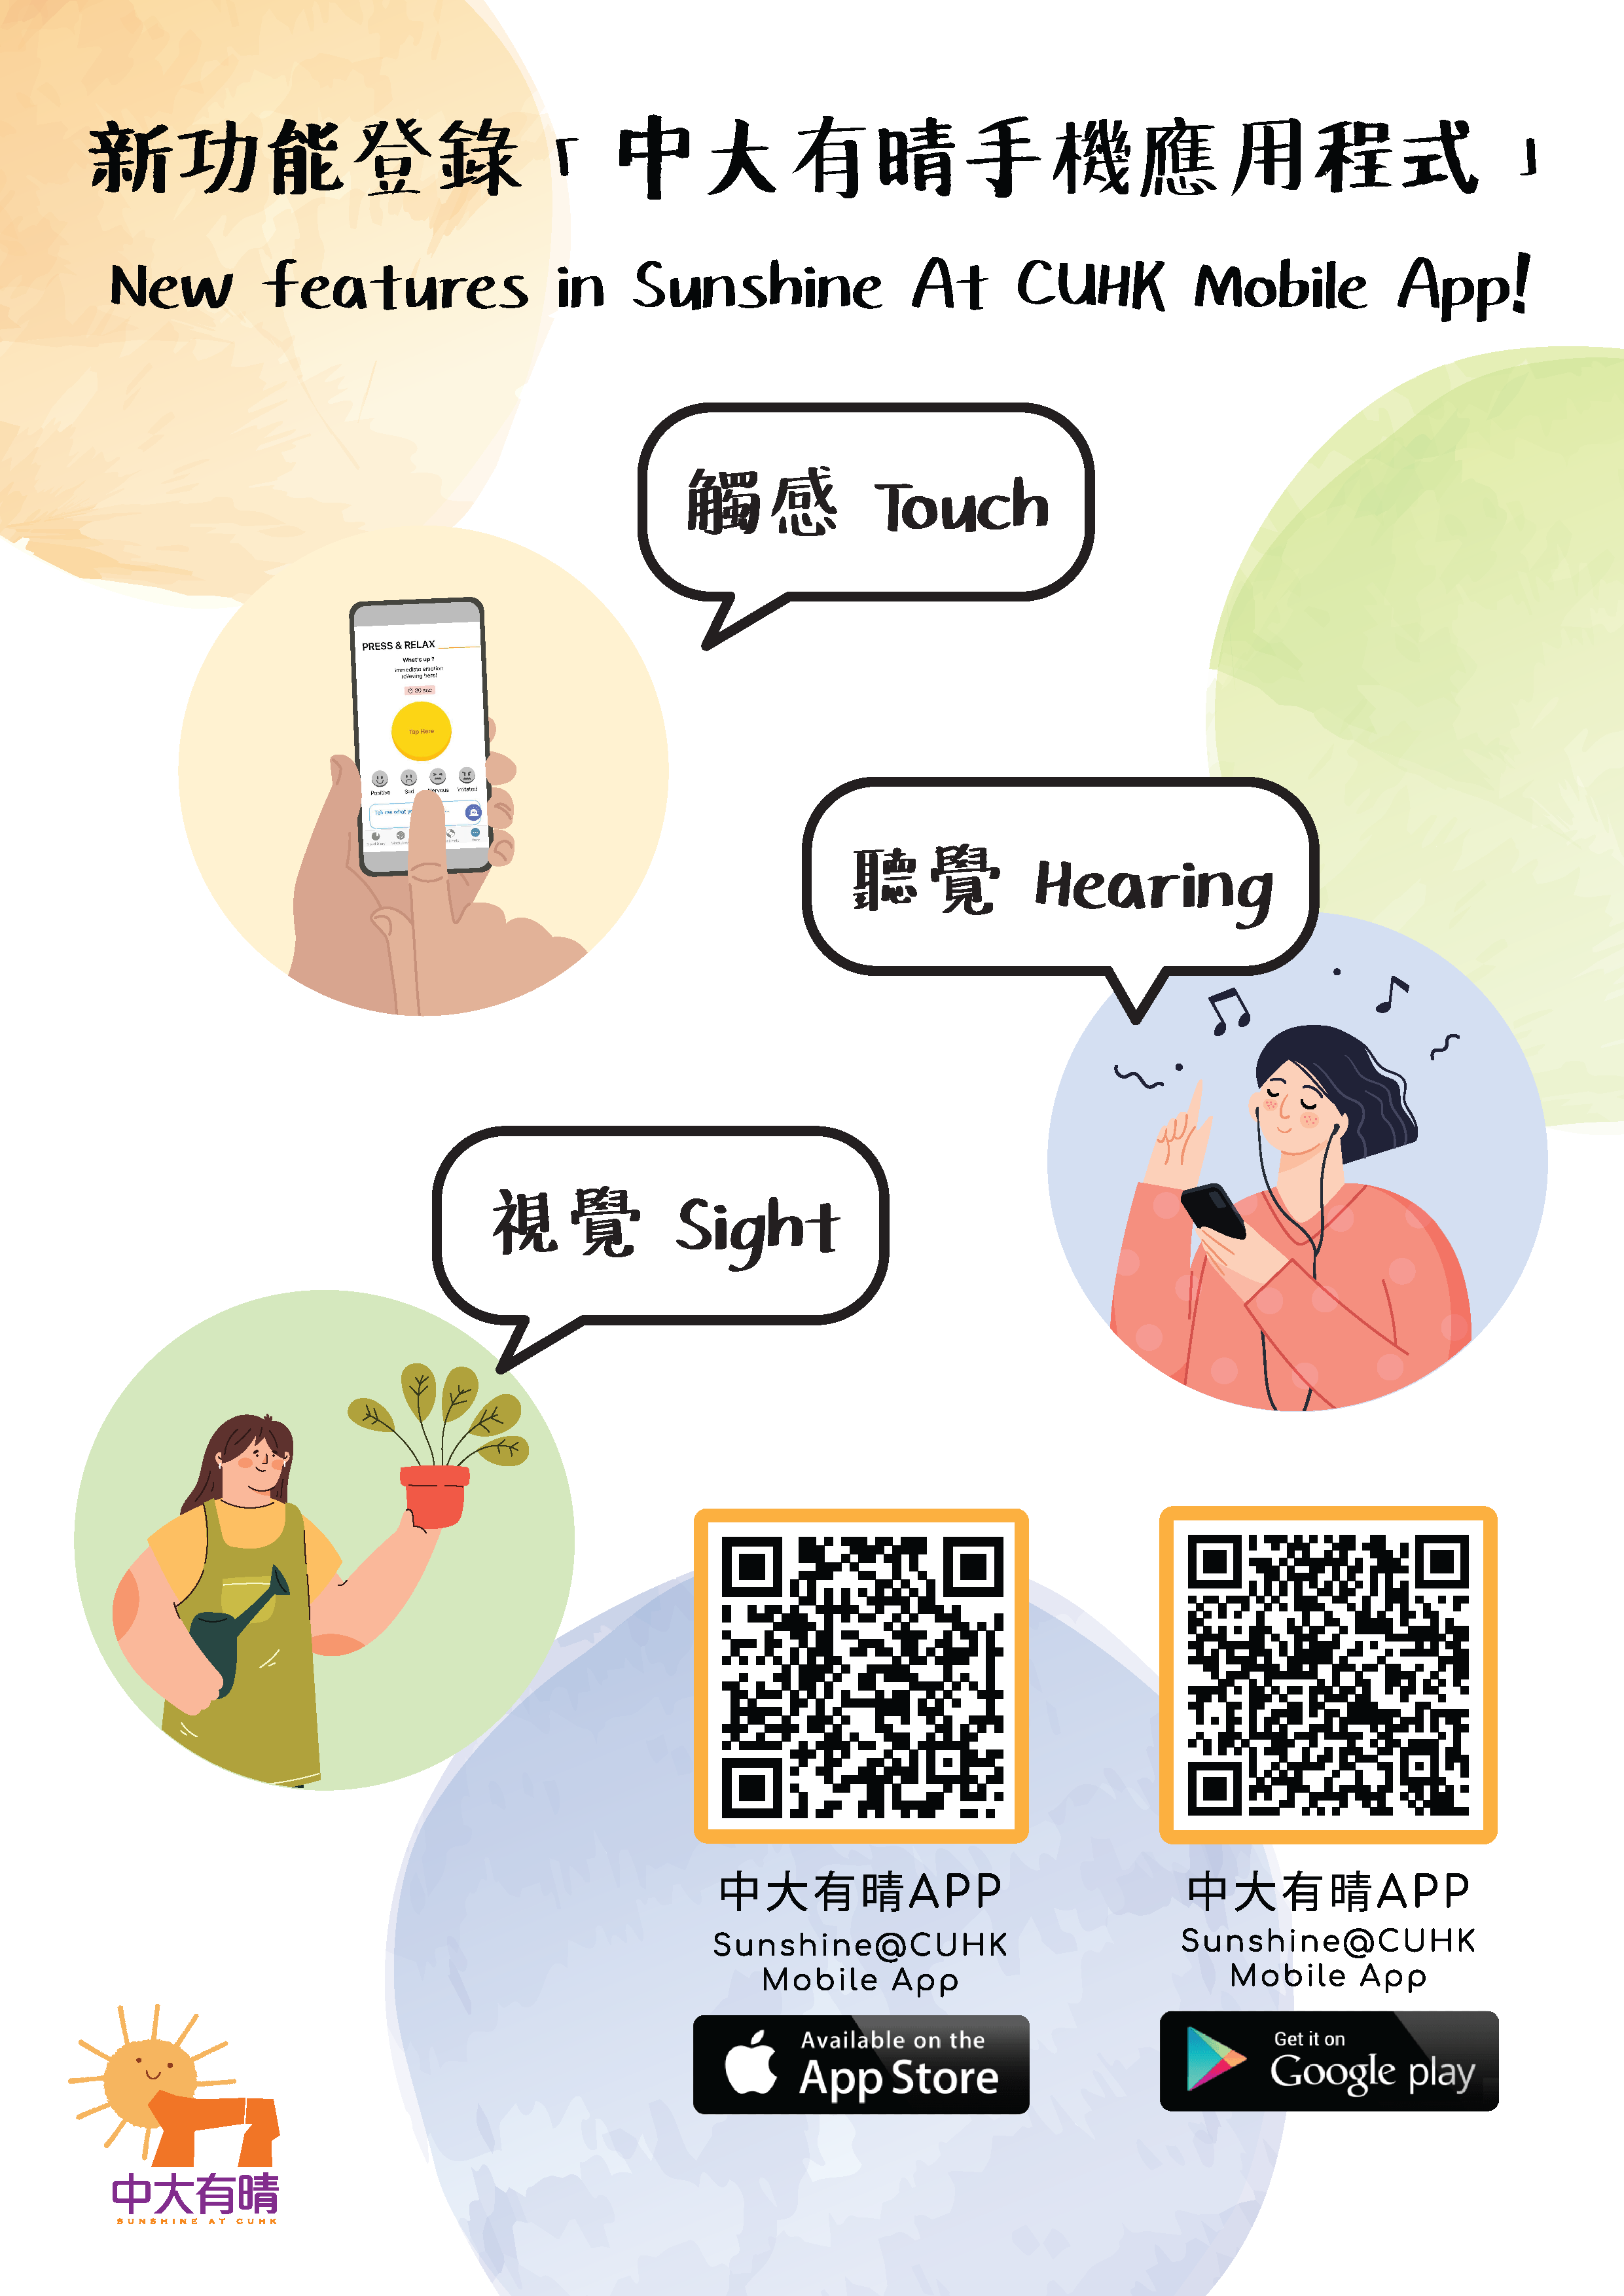 New functions are now available in Sunshine@CUHK Mobile App